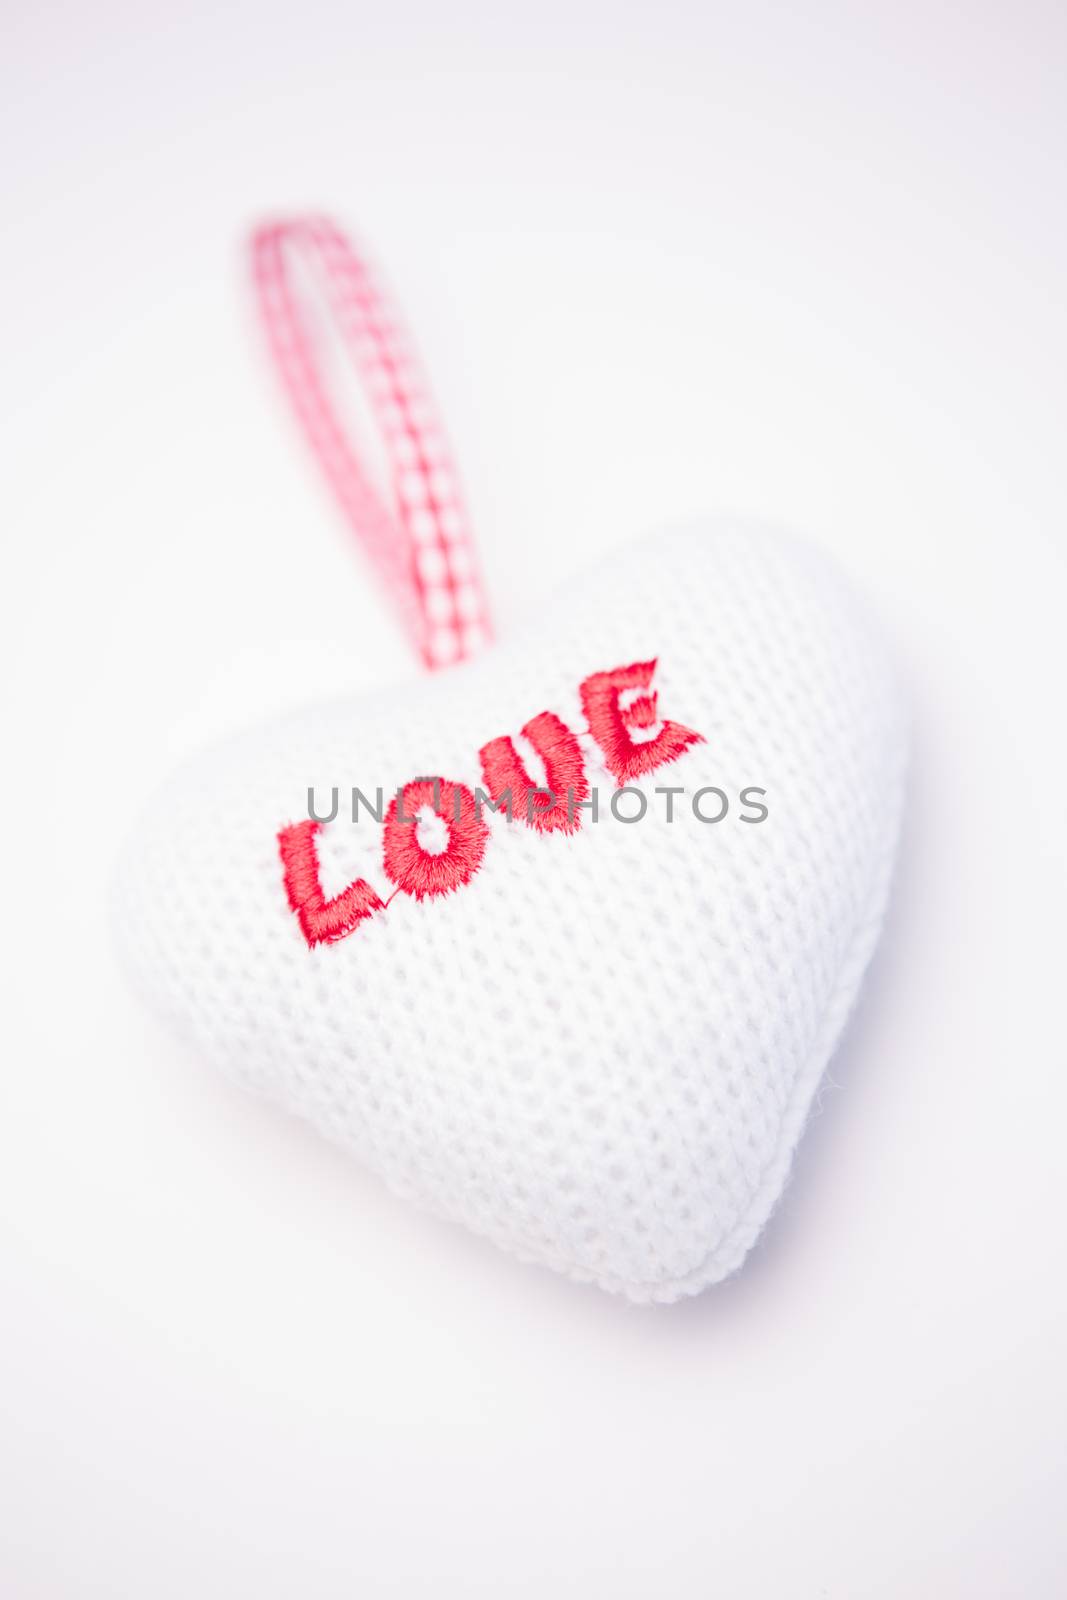 Pink and white love heart decoartion on white background